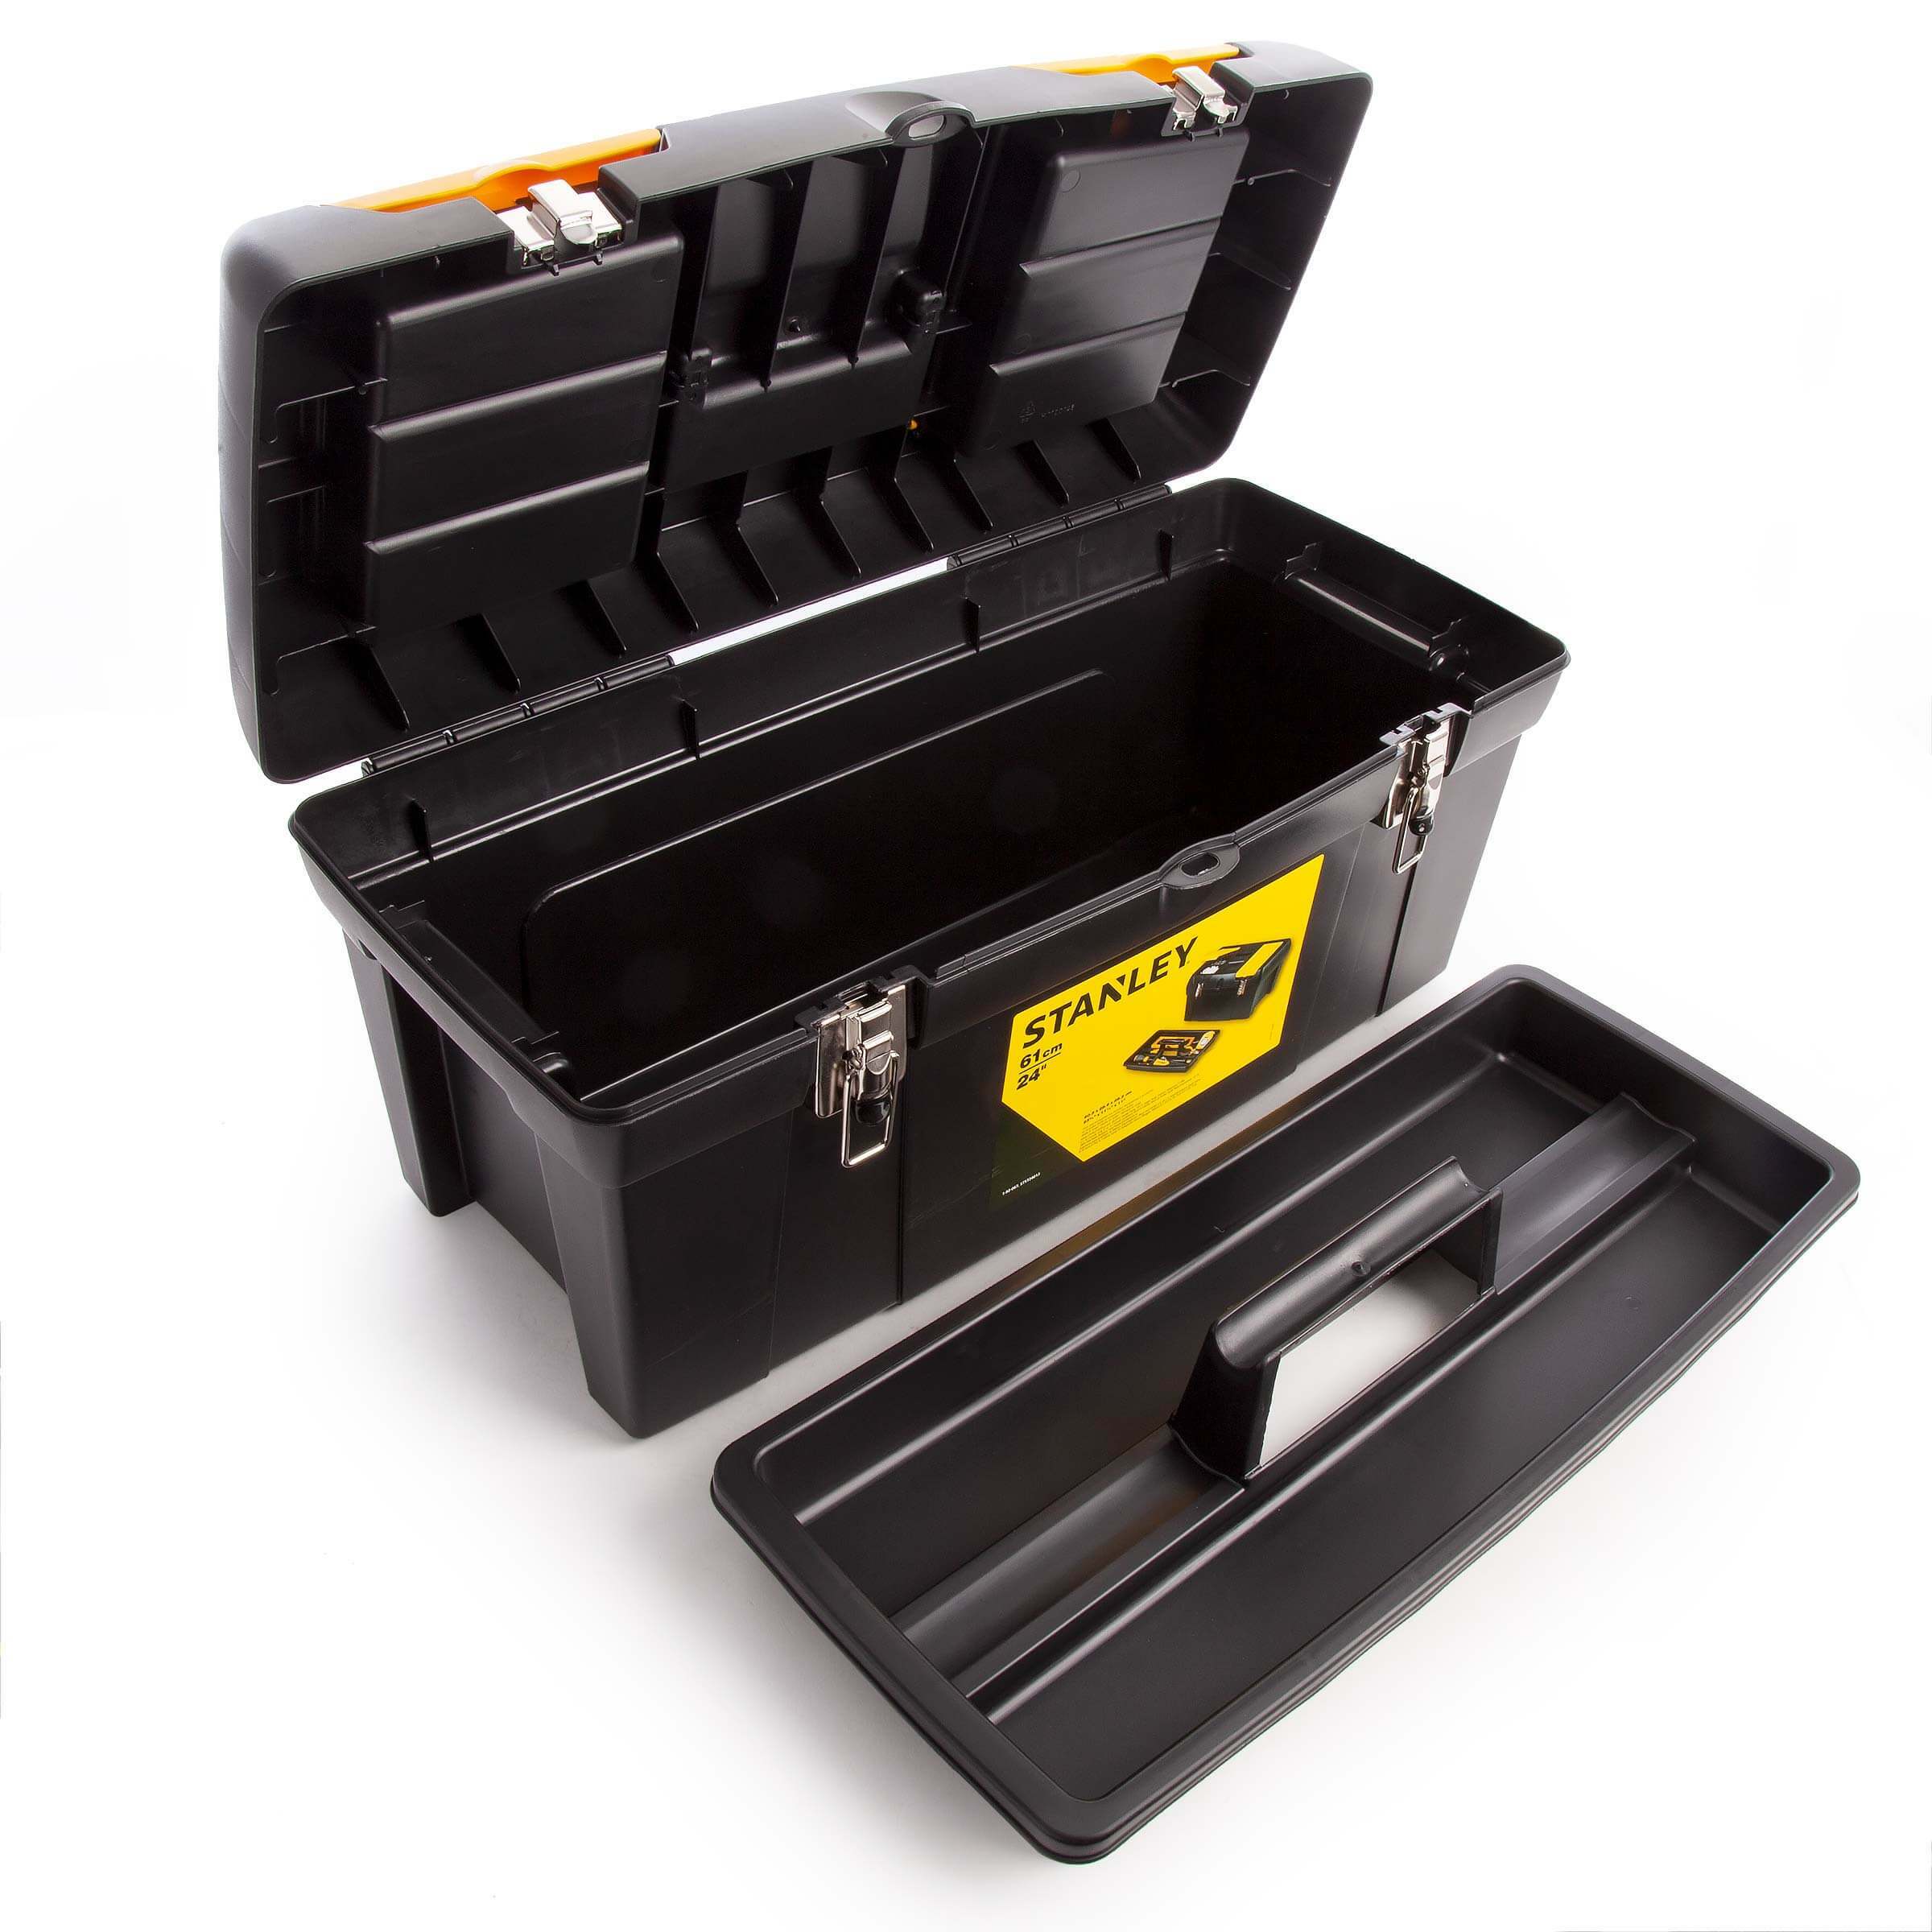 Series 2000 with 2 Built-In Organizers & Tray, Metal Latch 24" Stanley - 2